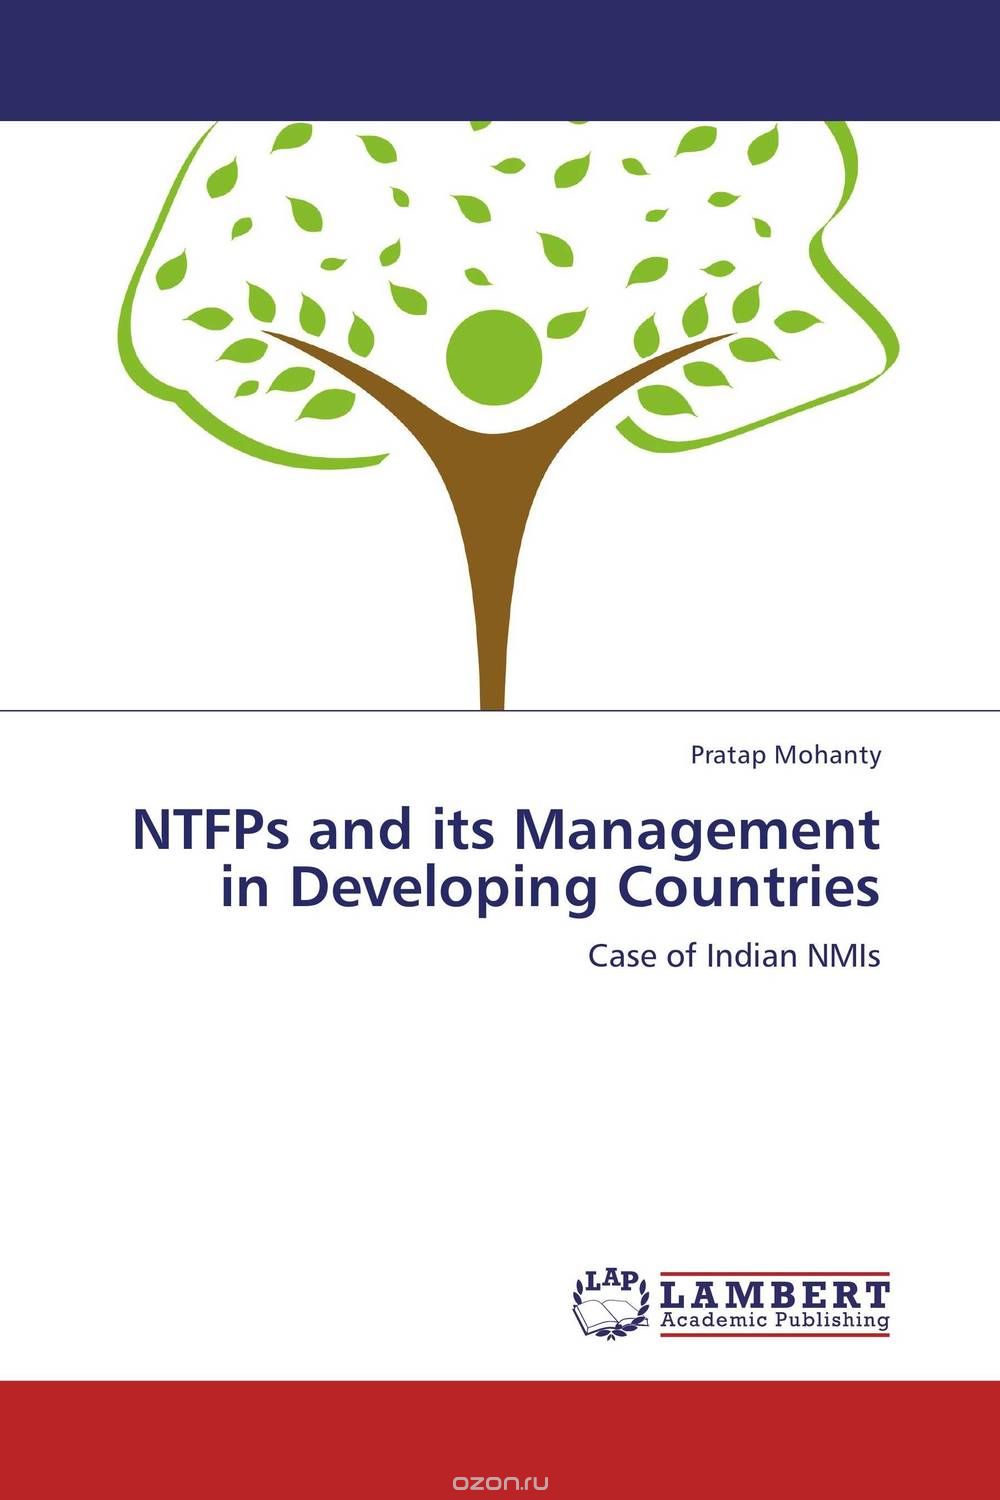 Скачать книгу "NTFPs and its Management in Developing Countries"